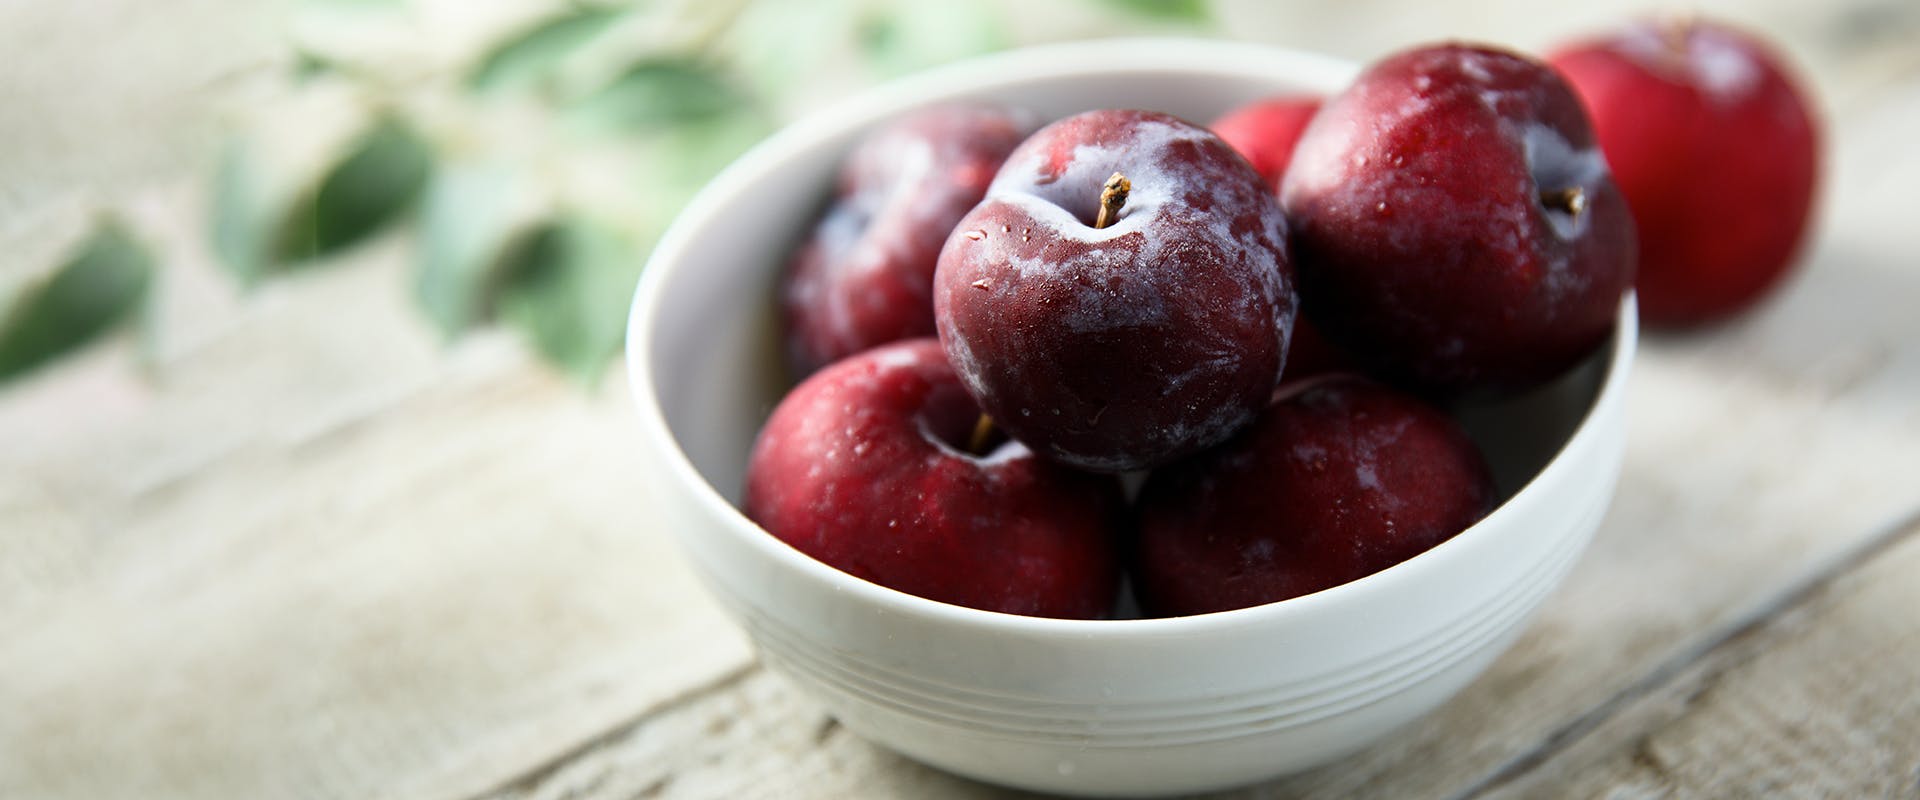 A bowl of fresh plums